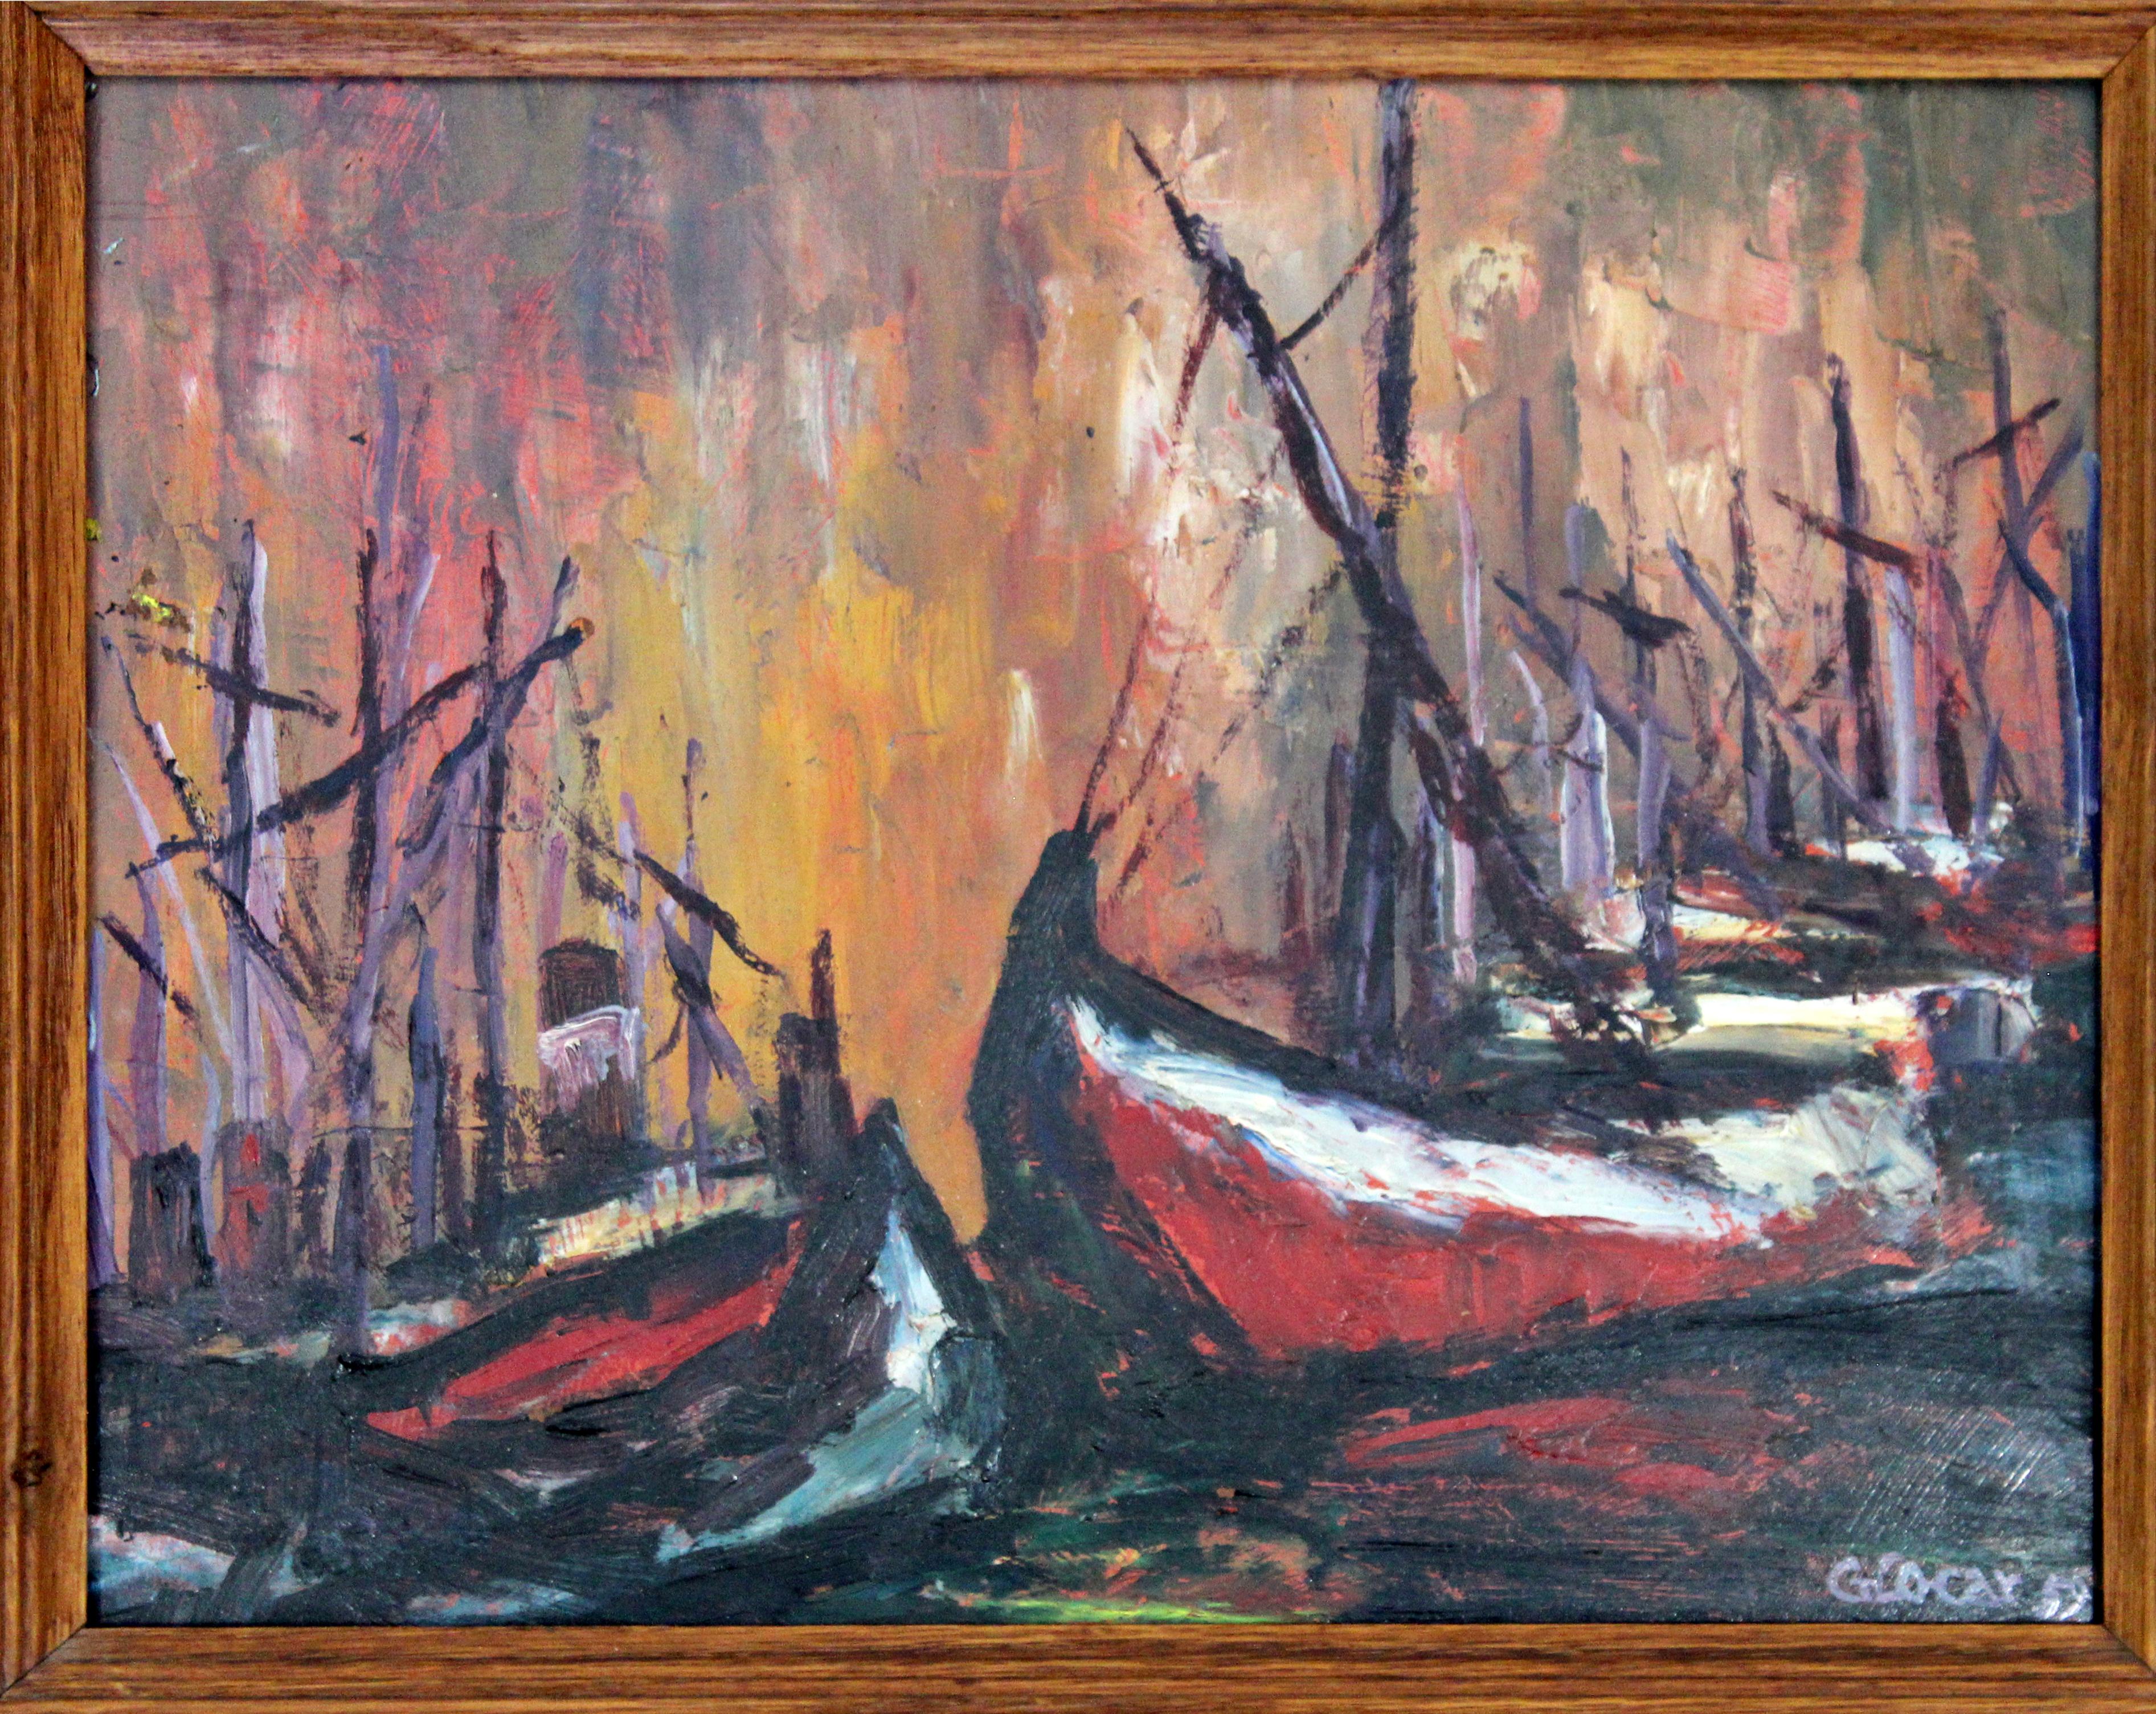 For your consideration is a beautiful, oil on board painting of ships, signed by Emilan Glocar, circa the 1970s. In excellent condition. The dimensions of the frame are 18